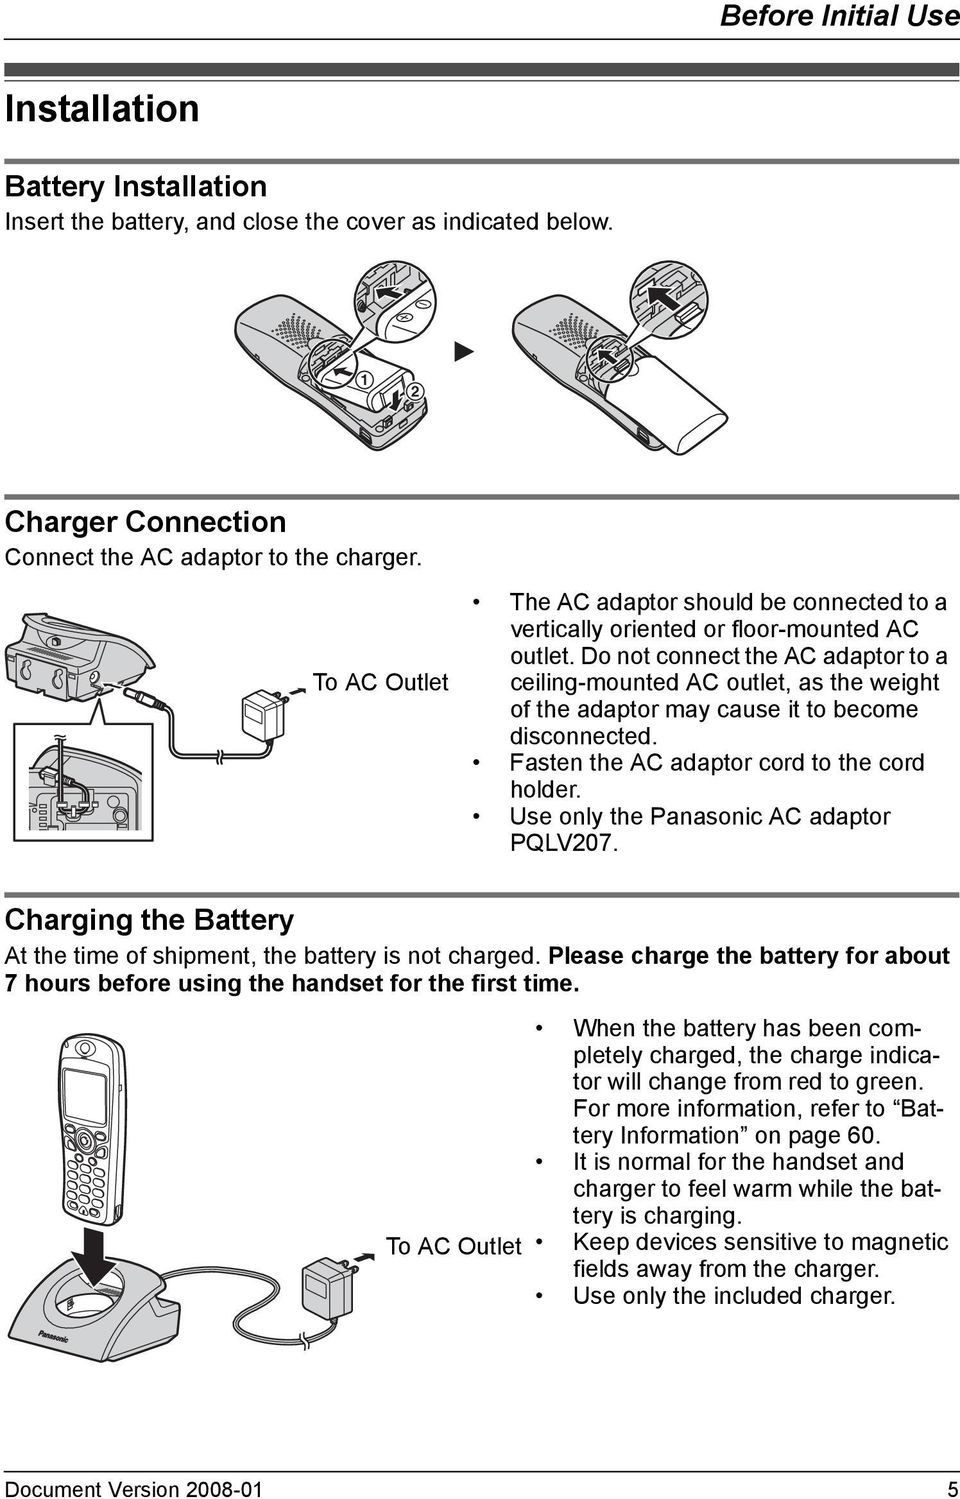 Do not connect the AC adaptor to a ceiling-mounted AC outlet, as the weight of the adaptor may cause it to become disconnected. Fasten the AC adaptor cord to the cord holder.